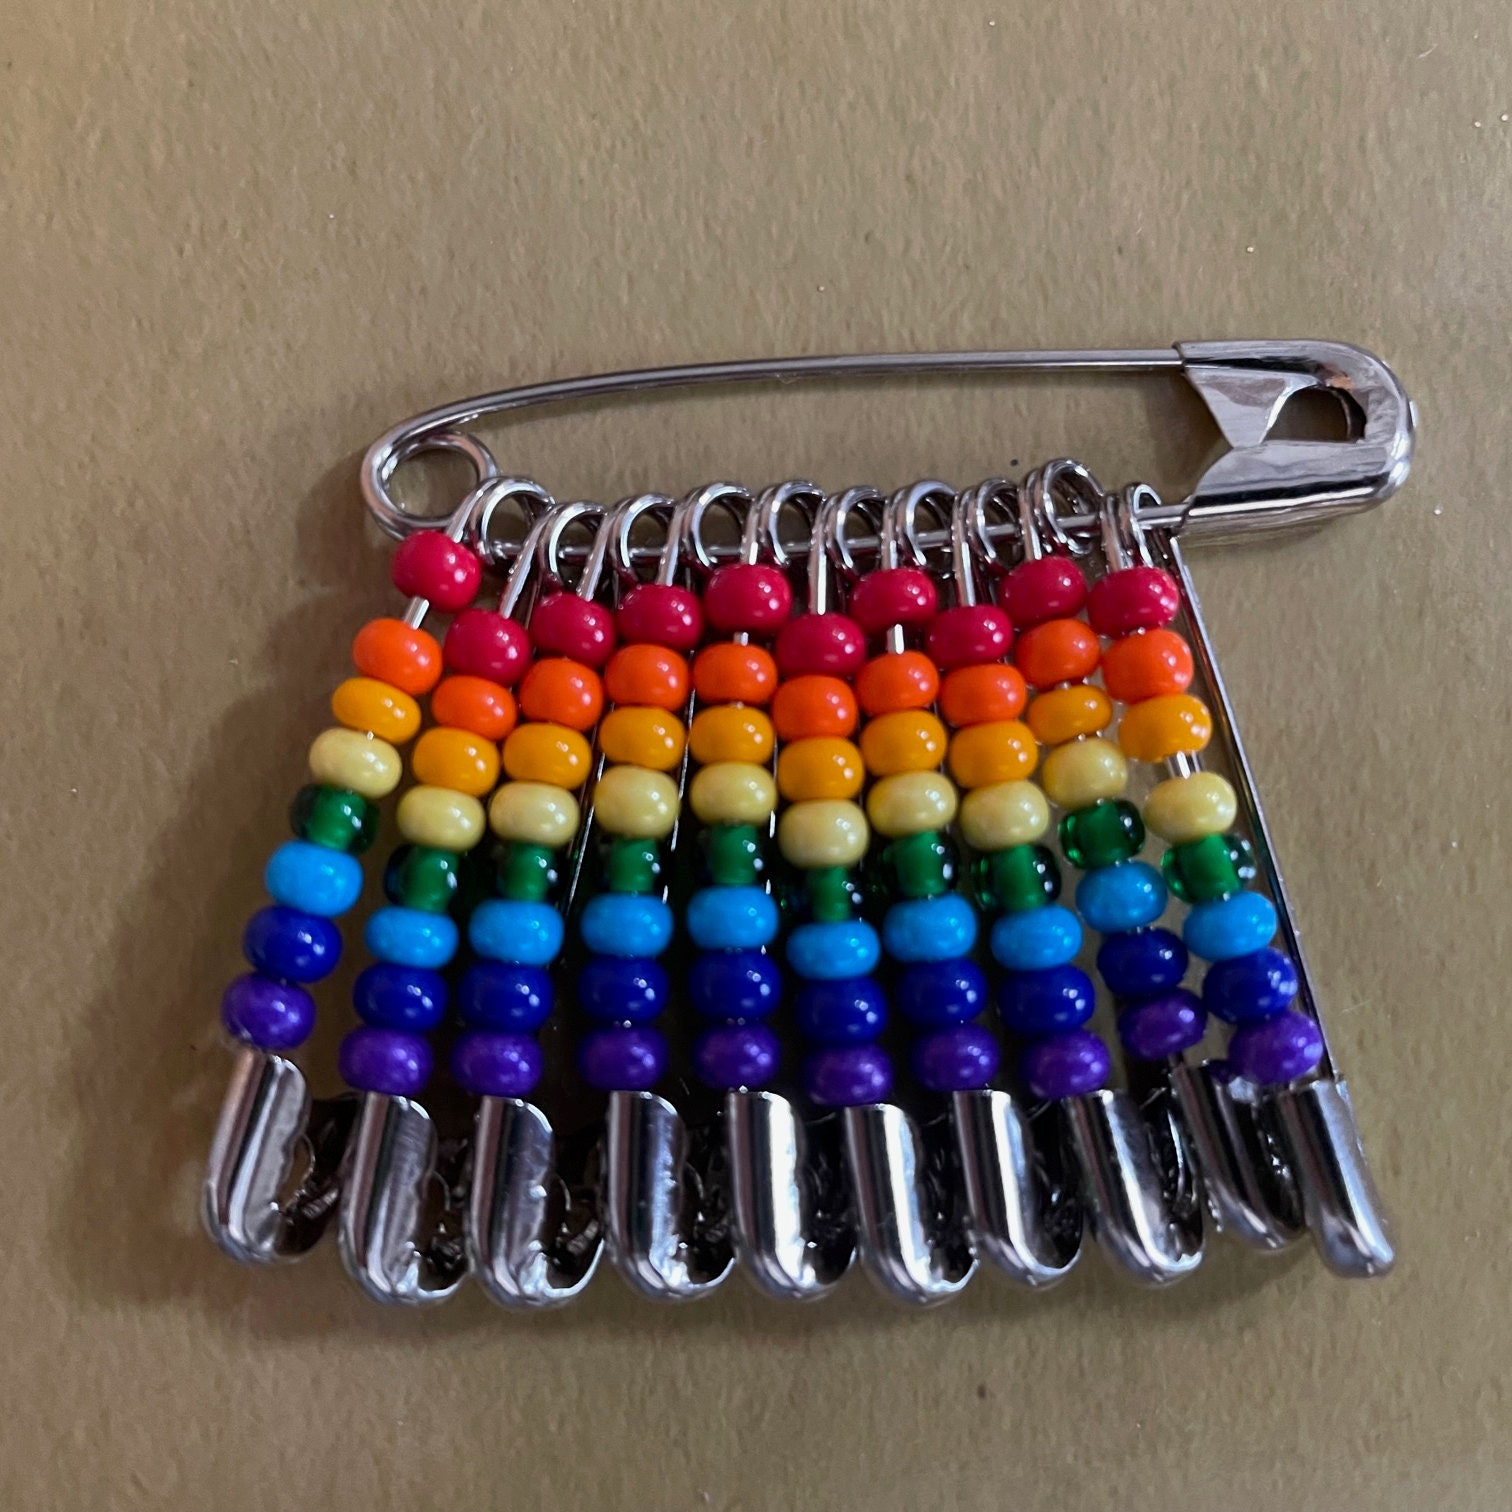 20pc Jumbo Safety Pins 85mmLarge Pin brooch Kilt Pins With EVERY Beads  Safety pins in Yellow,Blue,Purple,Red,Green